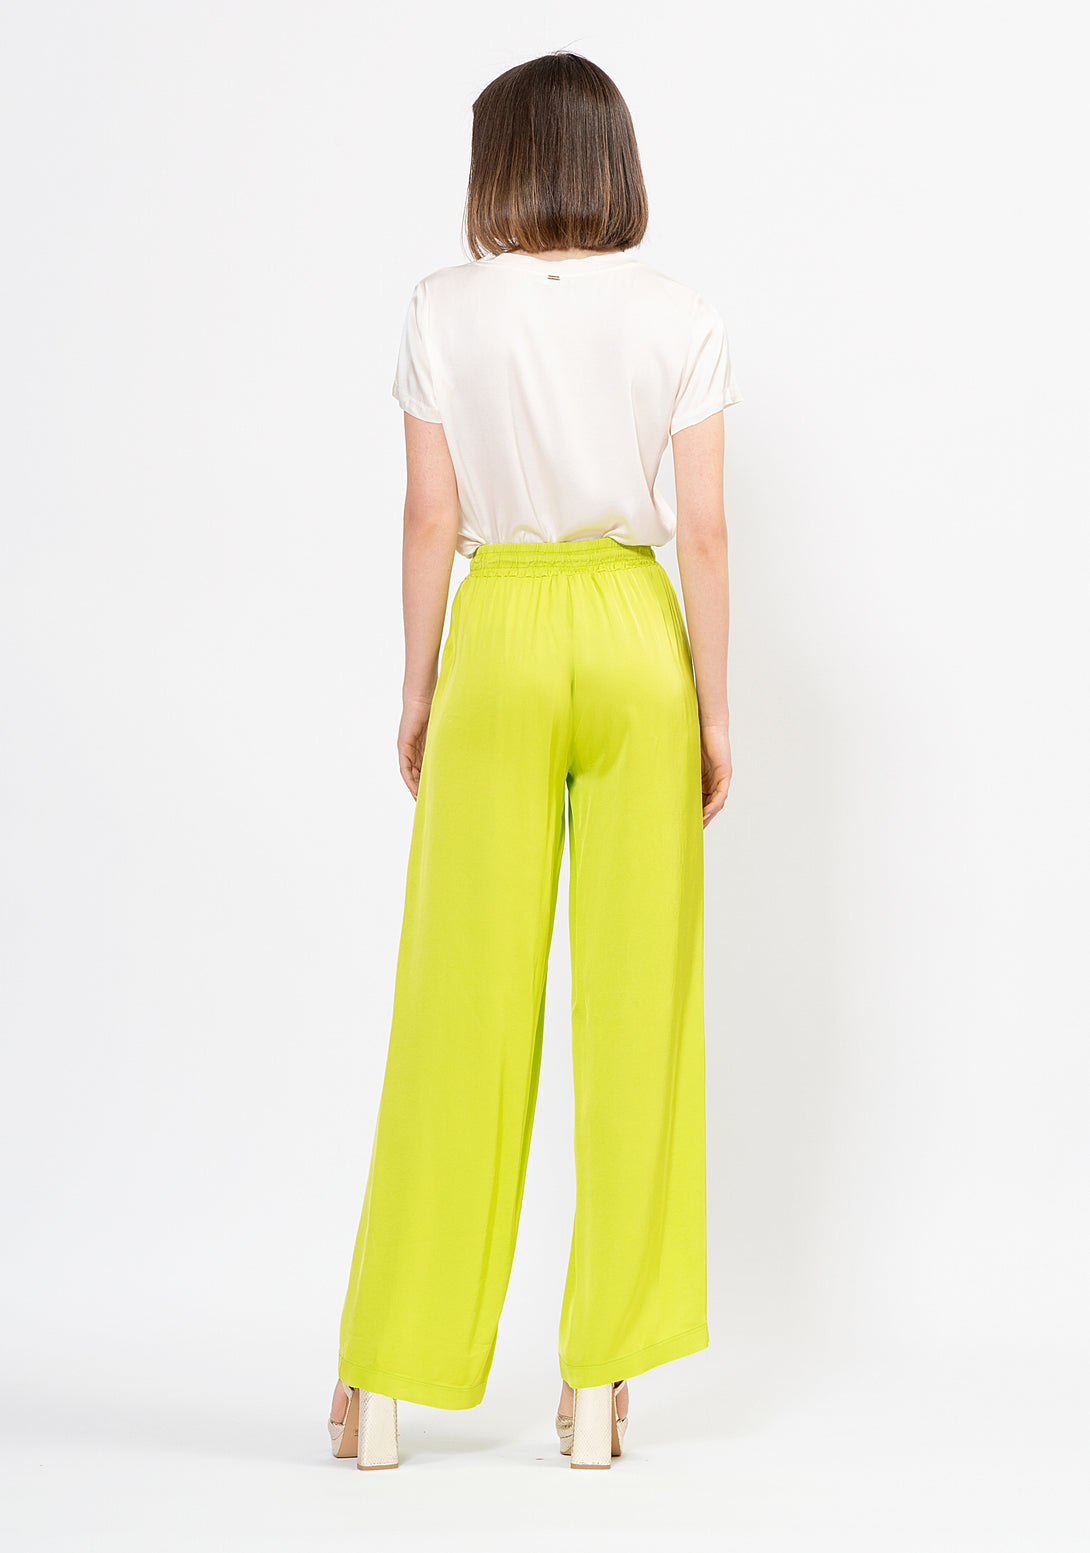 Palazzo pant wide fit made in soft viscose